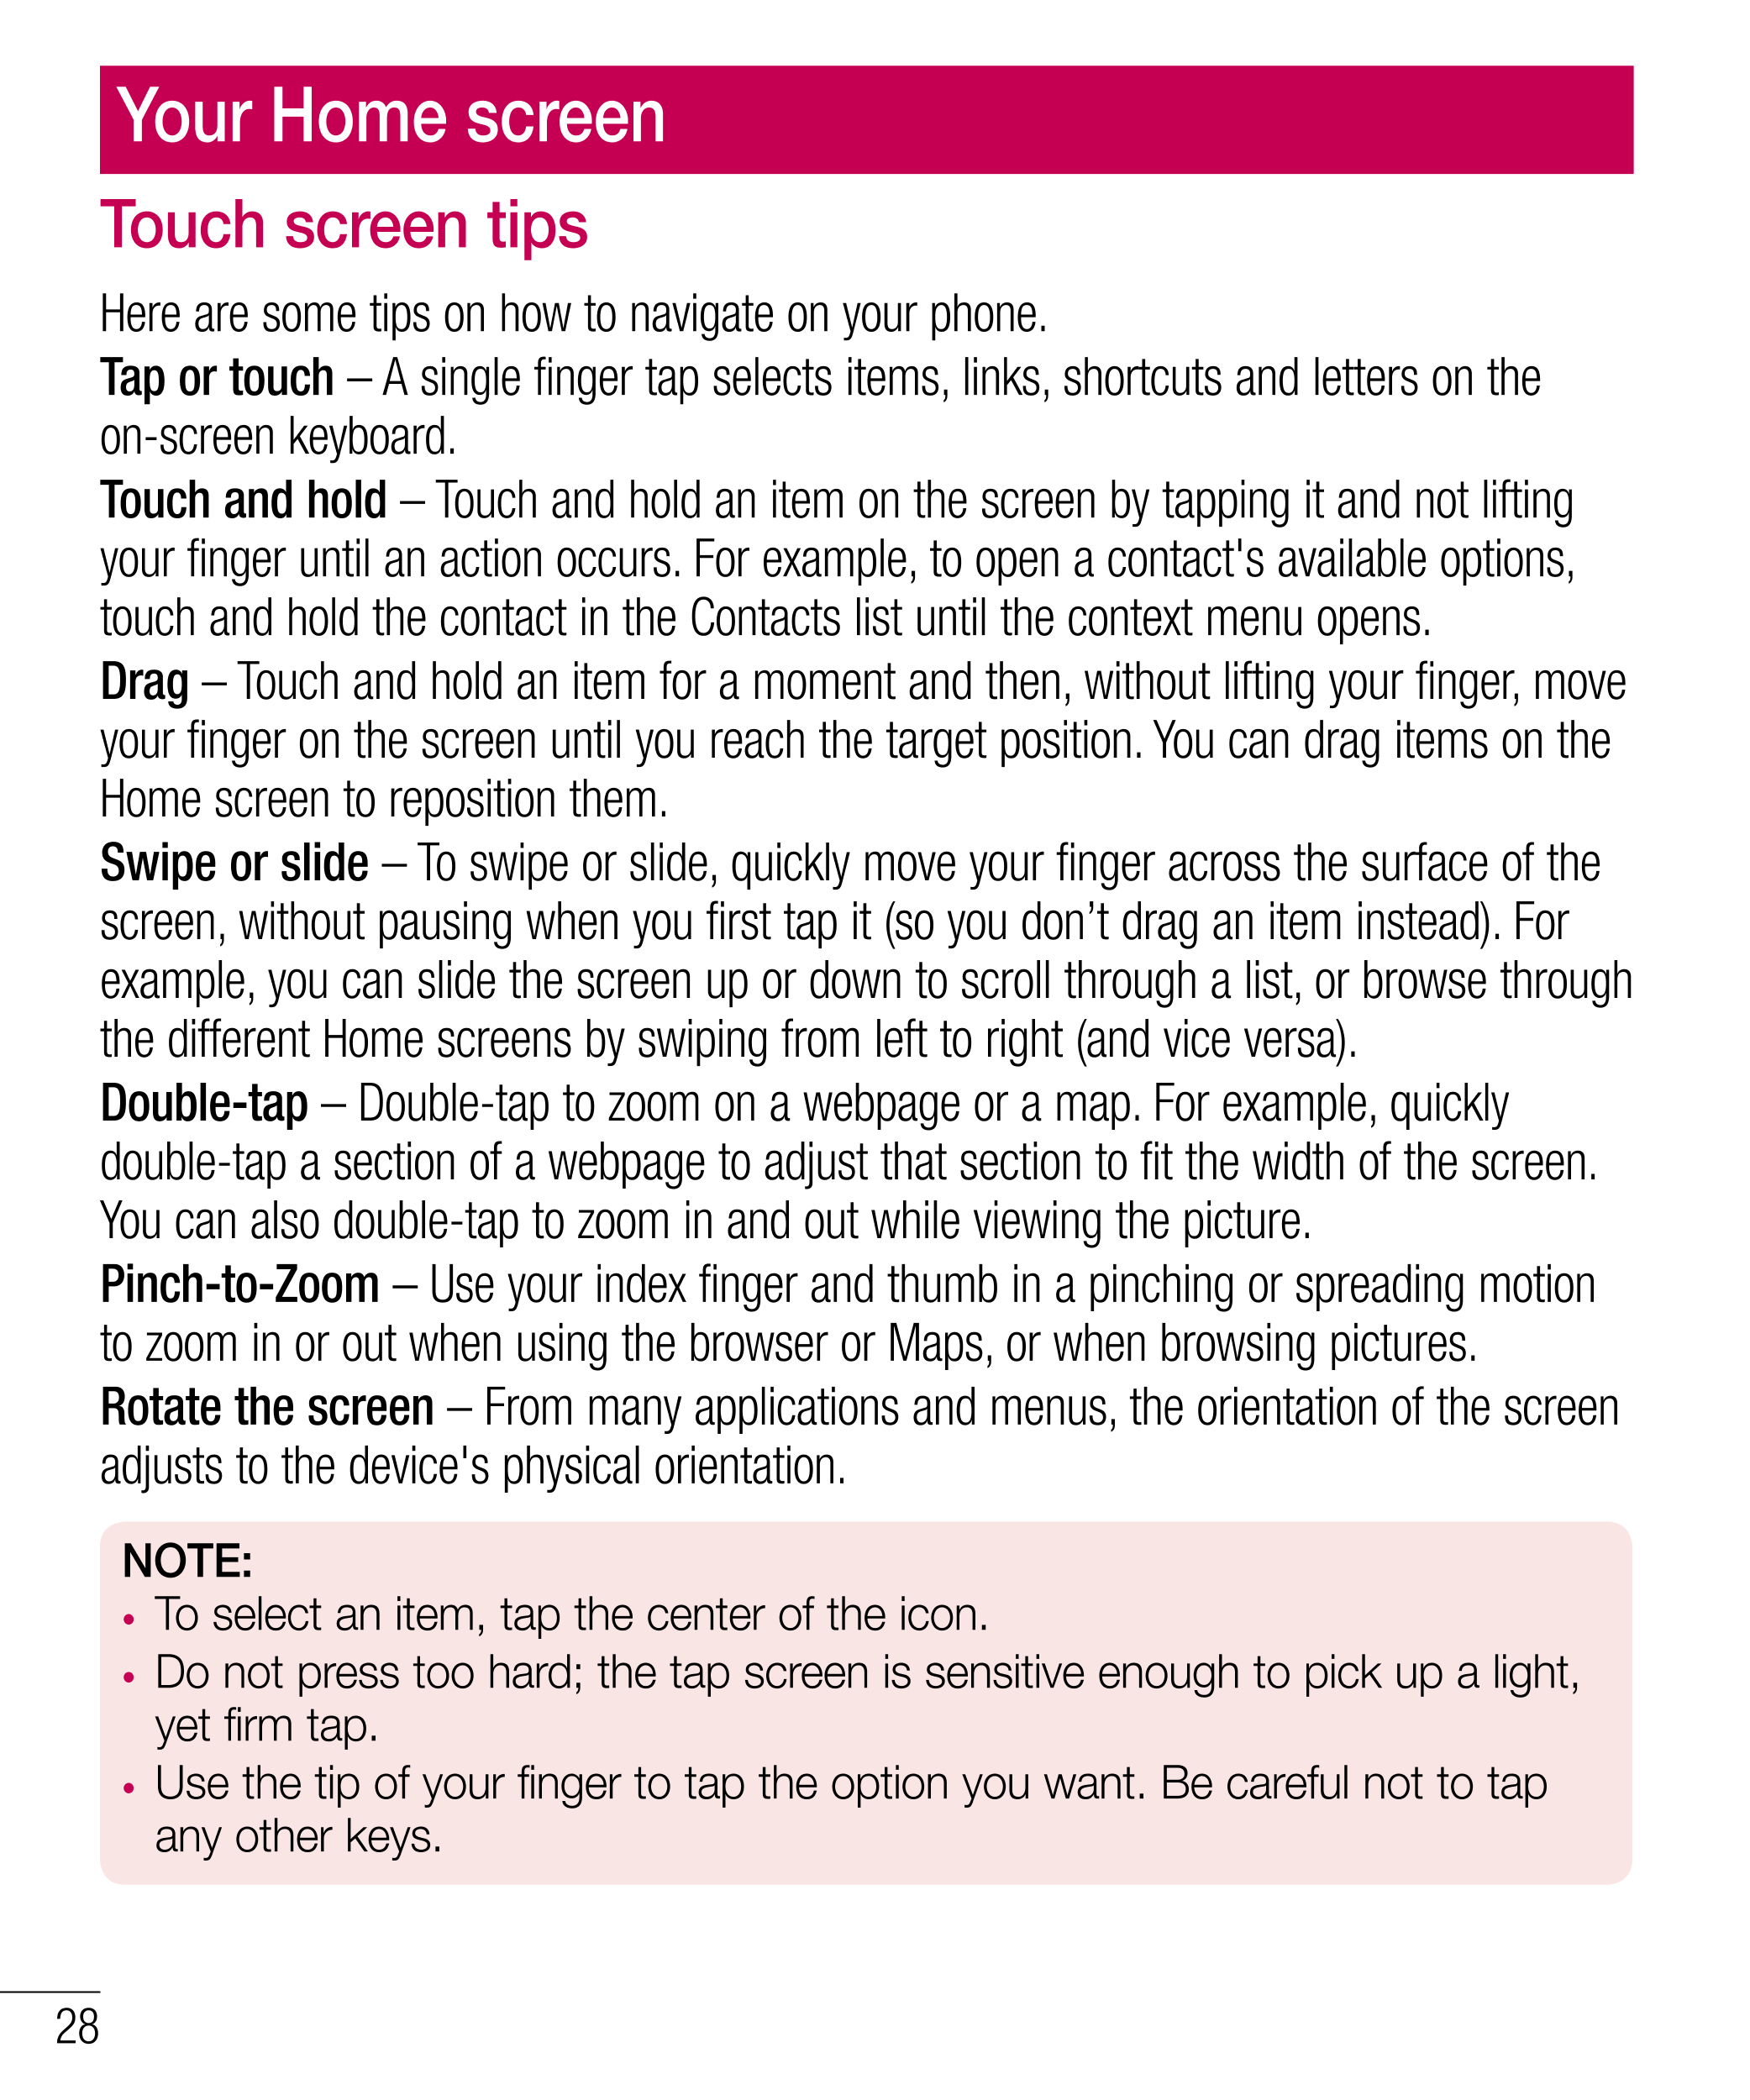 Your Home screen
Touch screen tips
Here are some tips on how to navigate on your phone.
Tap or touch – A single finger tap selec